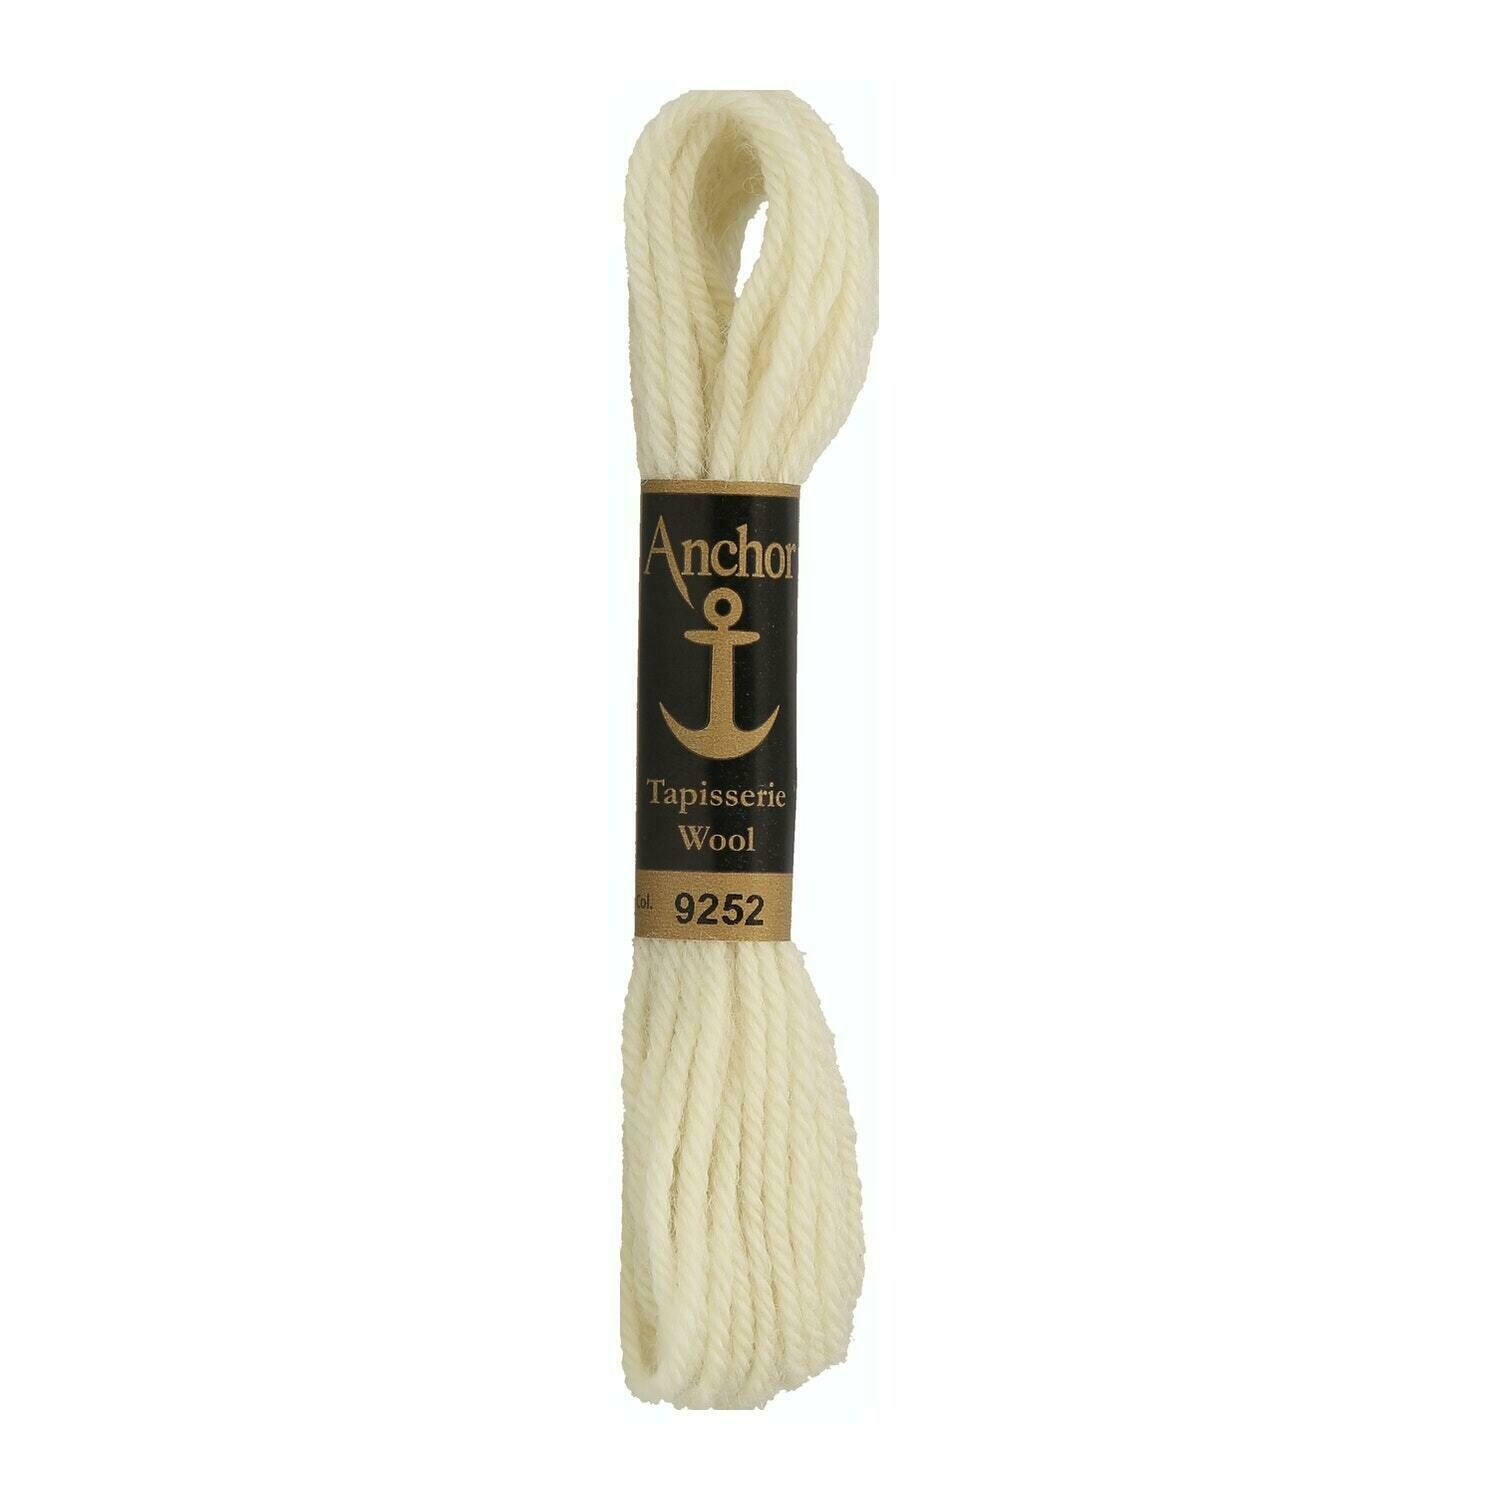 Anchor Tapisserie Wool #09252